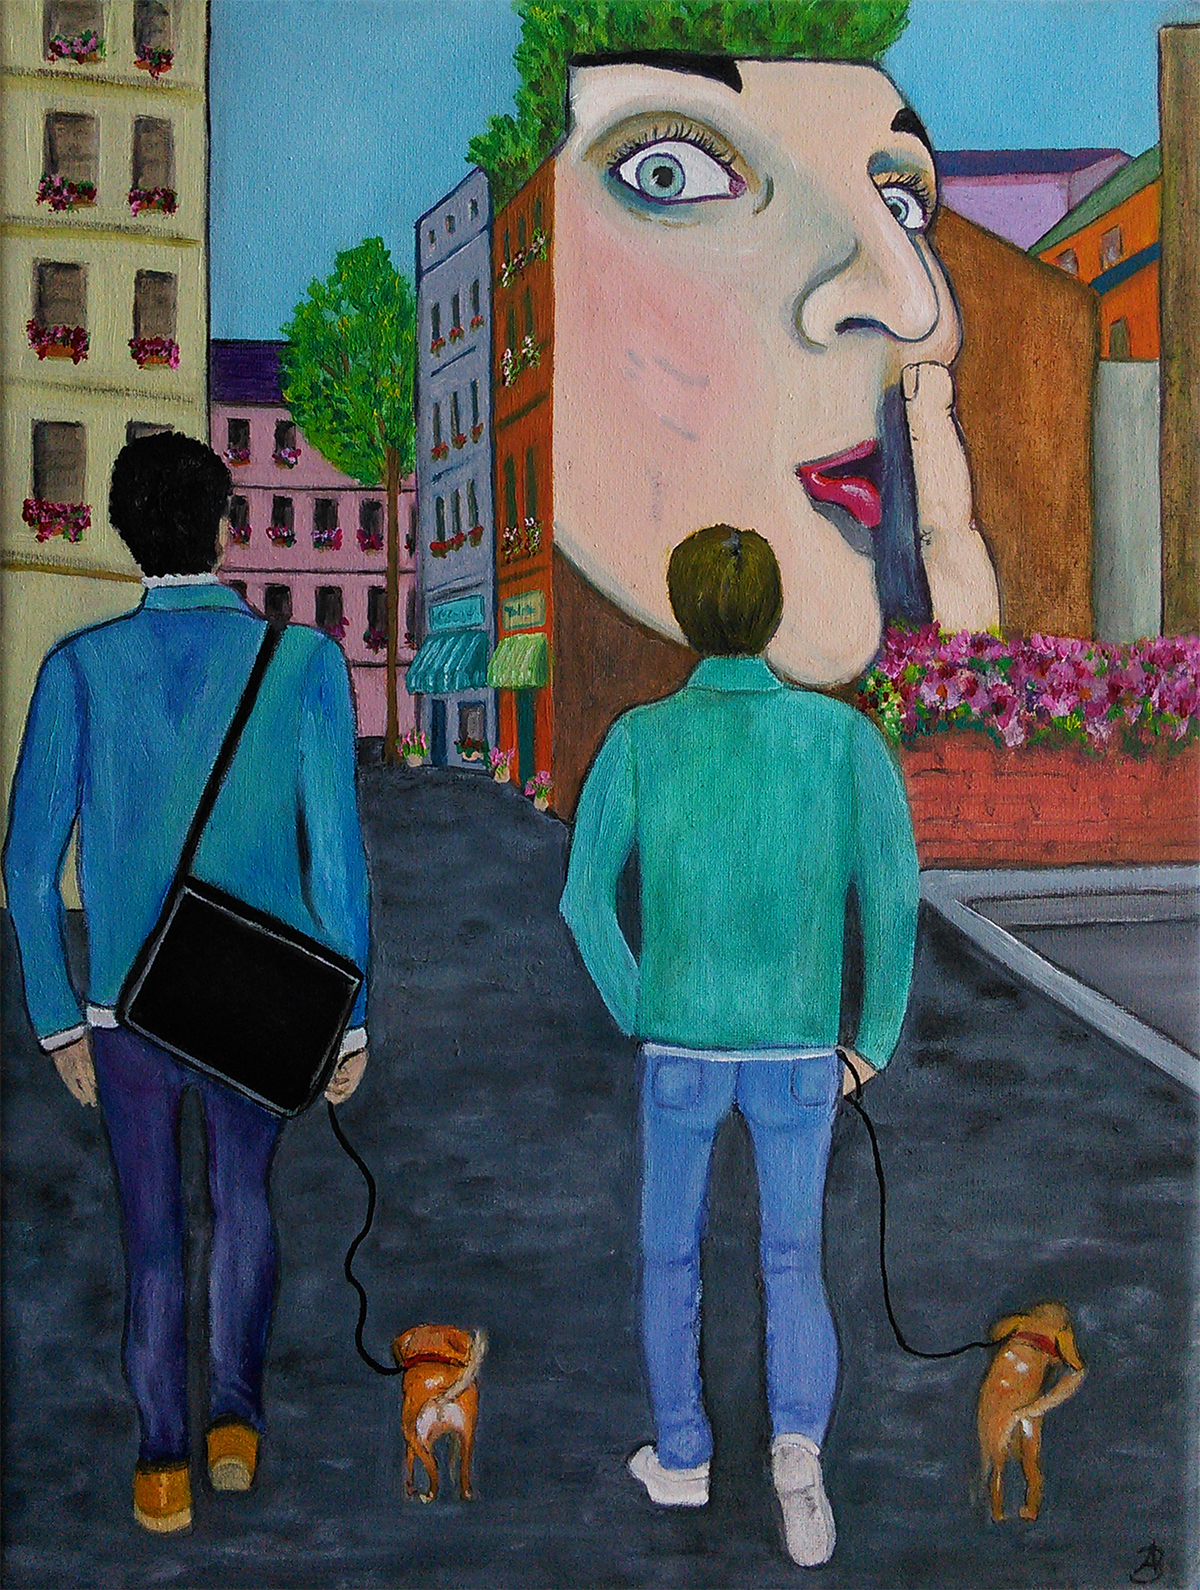 Paris Two Men Two Dogs - oil on 10 x 8 x 3/4 inch canvas by Audrey Breed, unframed.